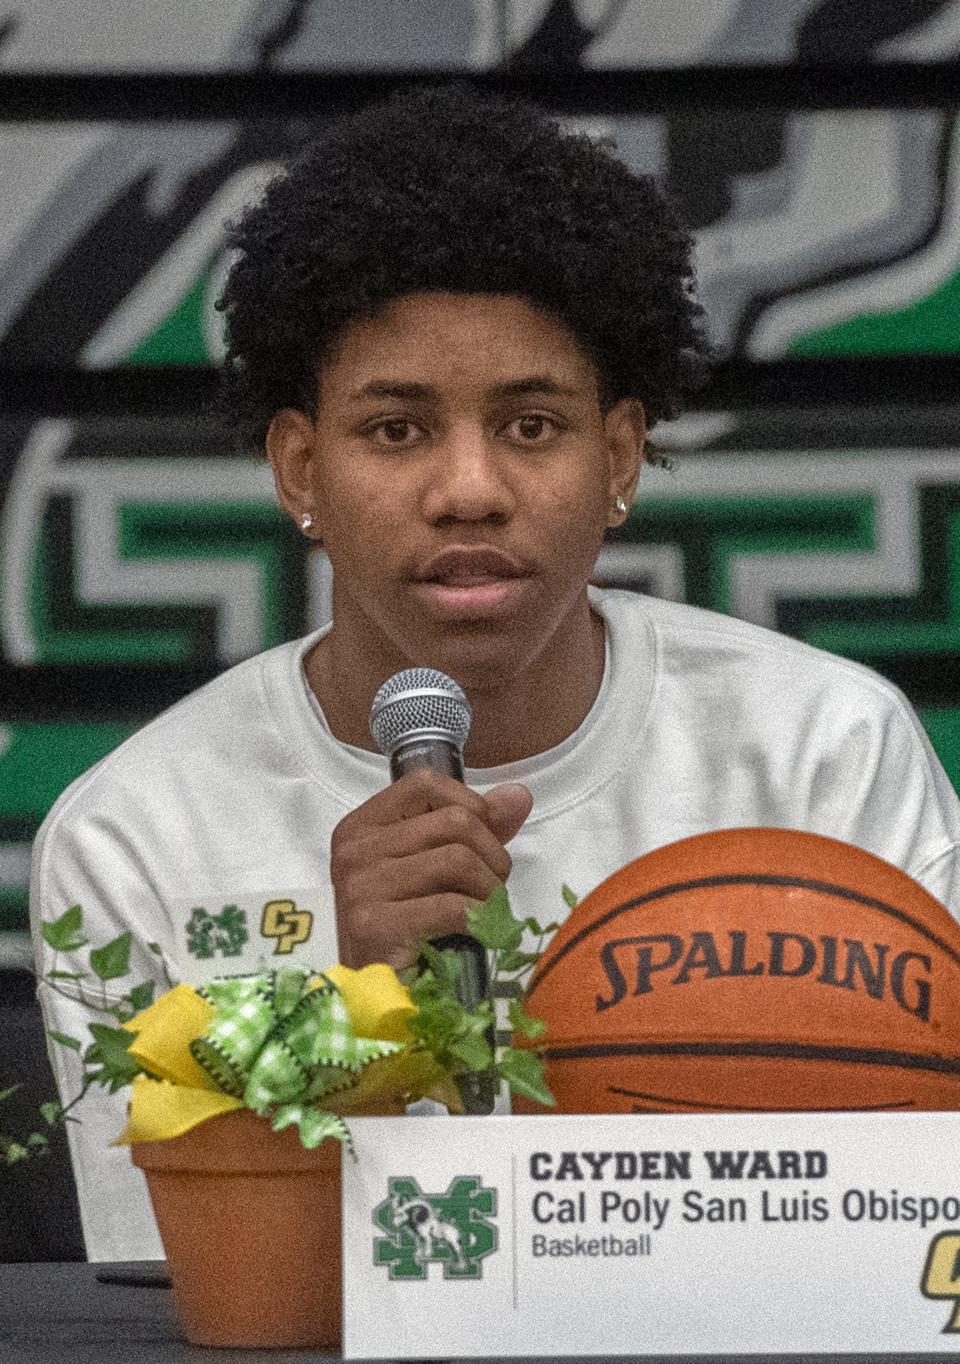 St. Mary's High School athlete Cayden Ward has signed letter of intent to play basketball for Cal Poly San Luis Obispo during a ceremony at the school in Stockton on Apr. 17, 2024.